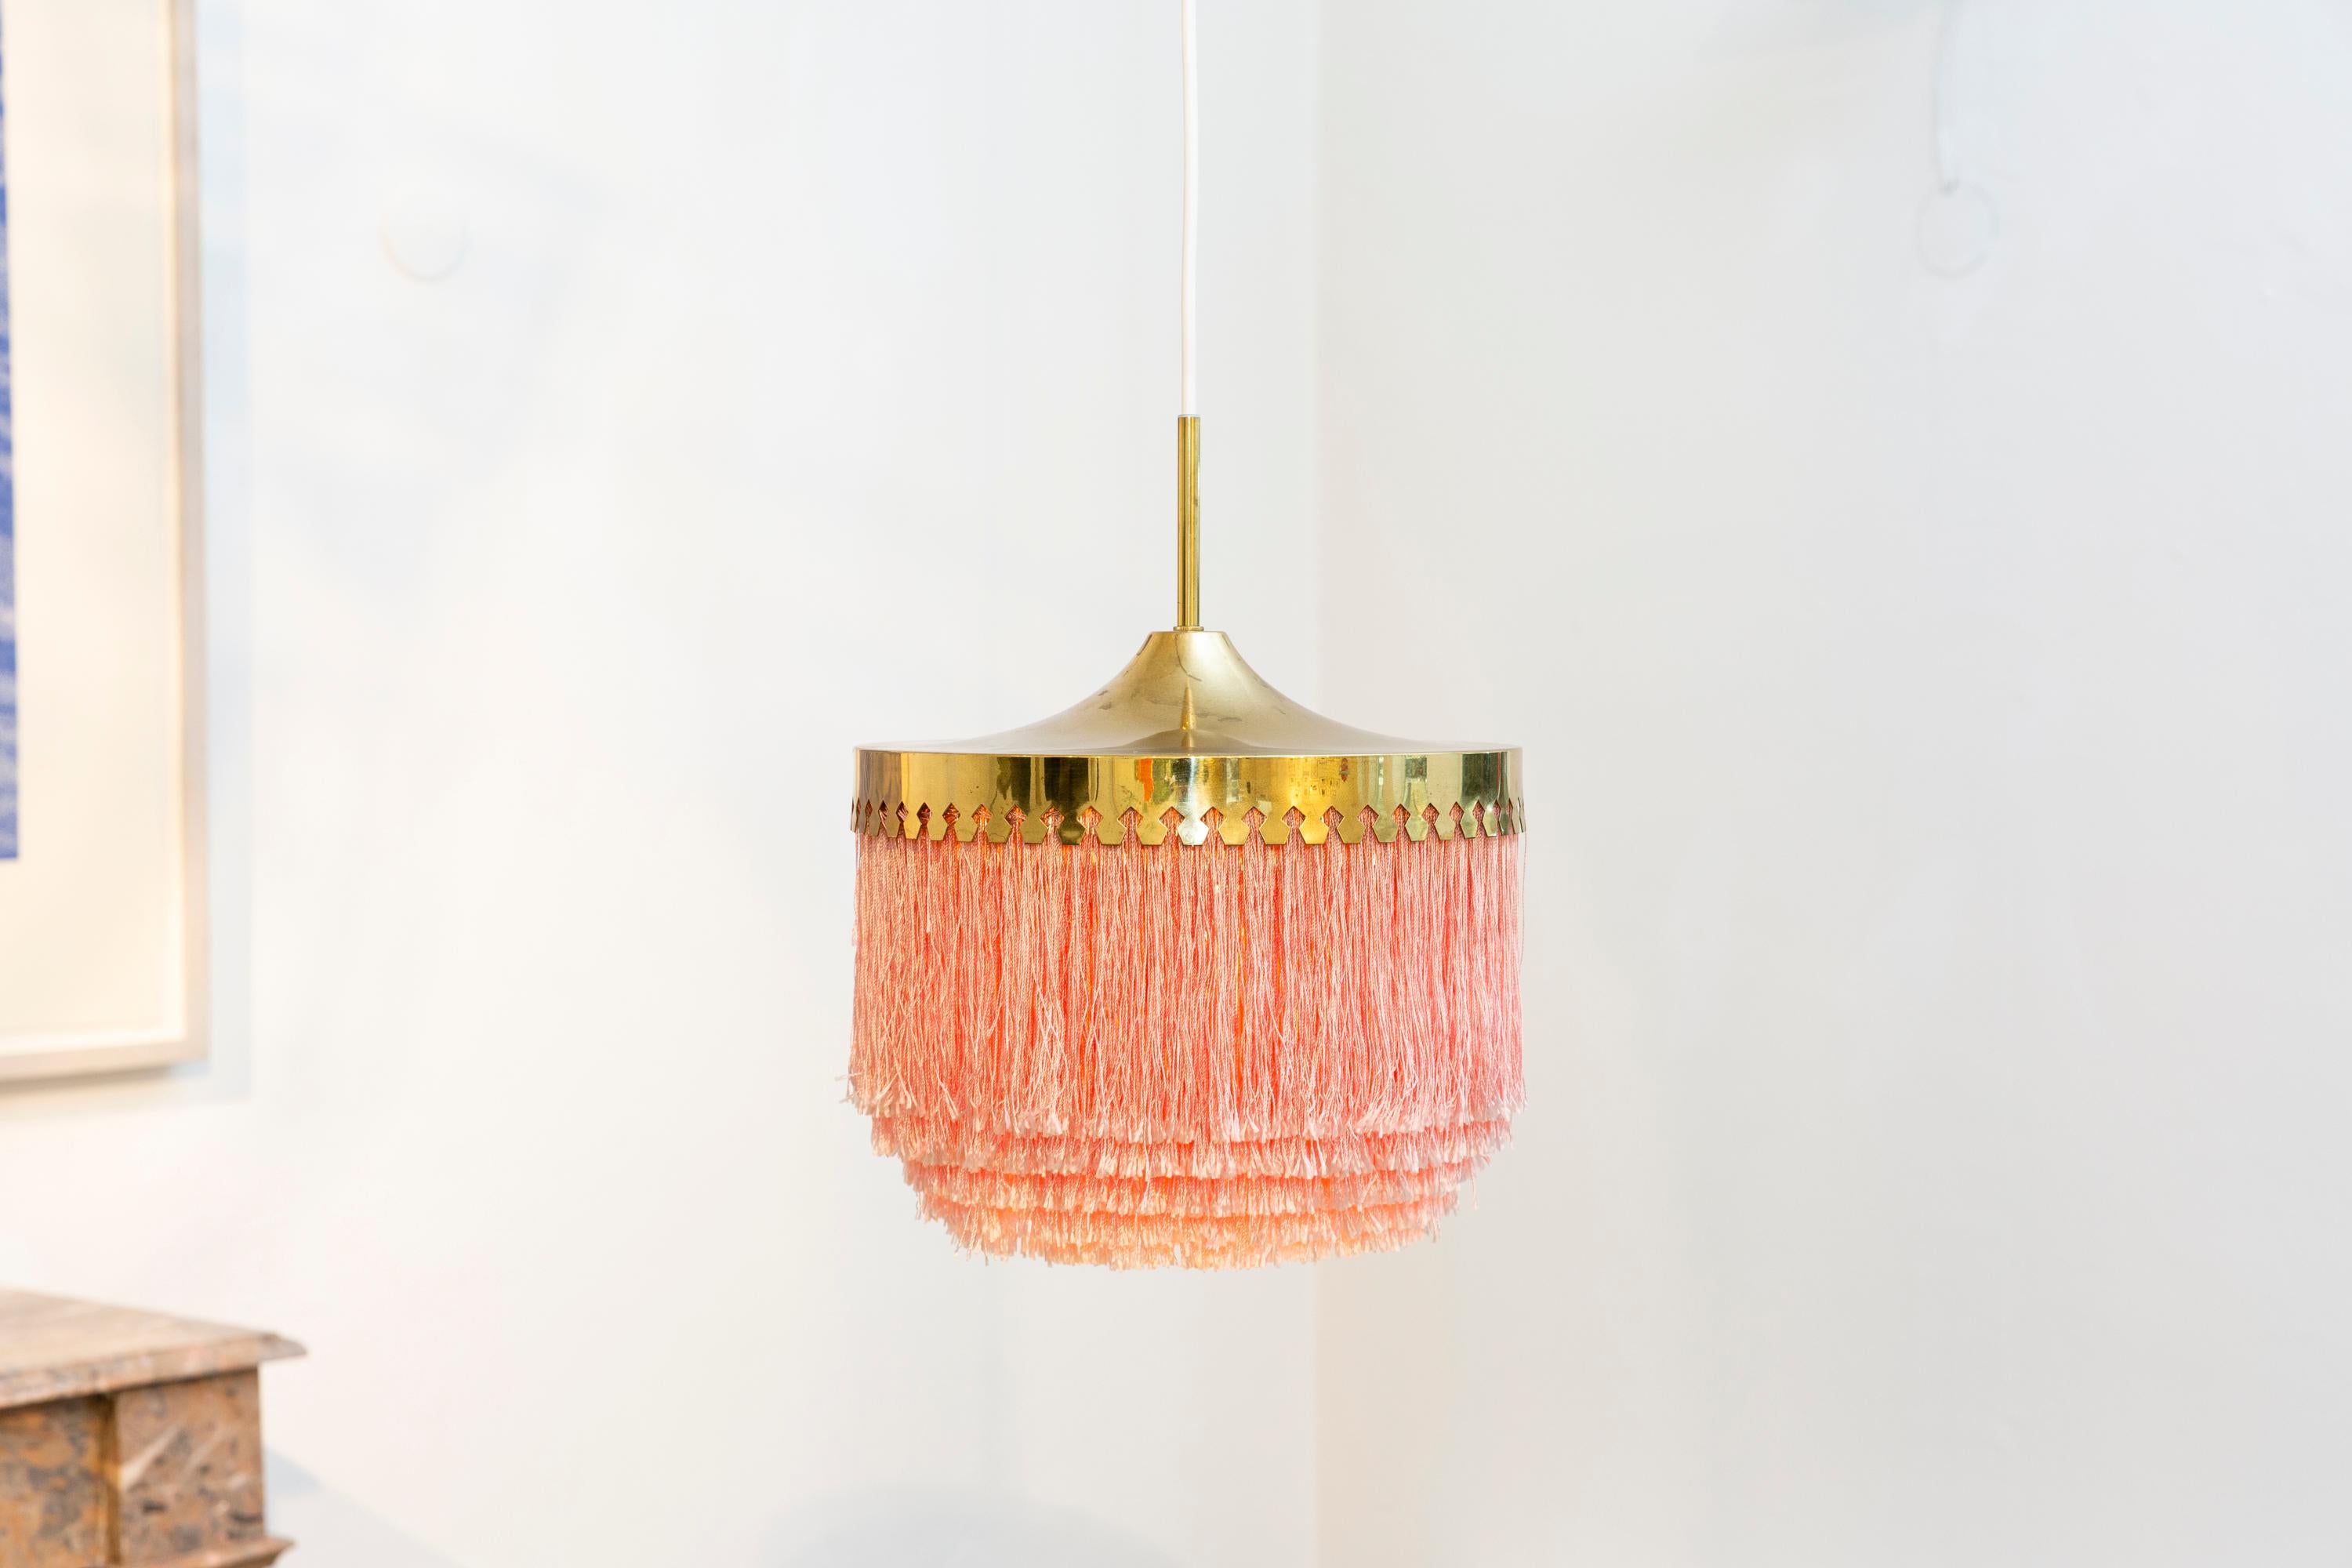 Beautiful Hans-Agne Jakobsson pink fringe ceiling lamp in brass. Produced by Hans-Agne Jakobsson AB in Markaryd, Sweden.